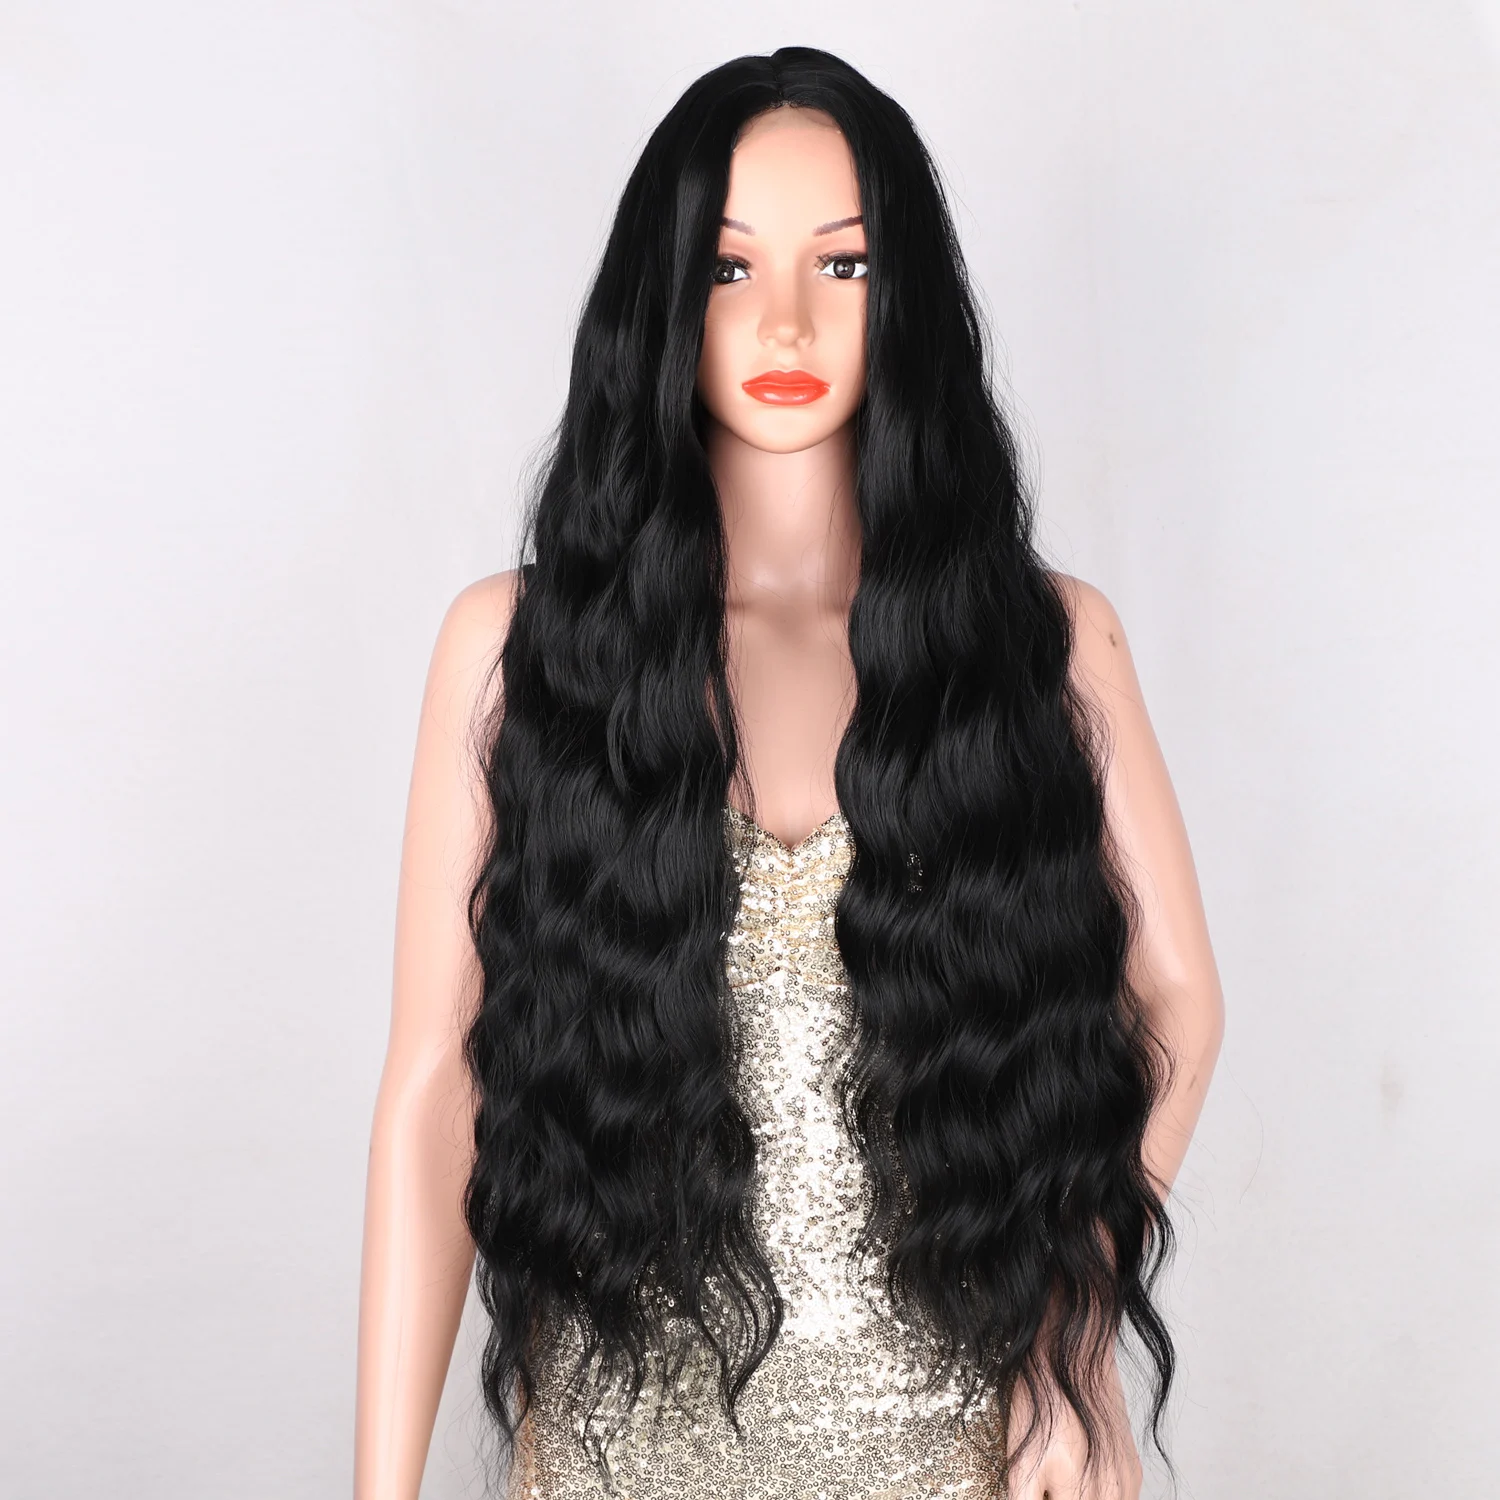 Kookastyle Synthetic Wigs Long Water Wave Wigs For Black Woman Black Wigs Woman Hair Cosplay Wigs Heat Resistant Natural Hair